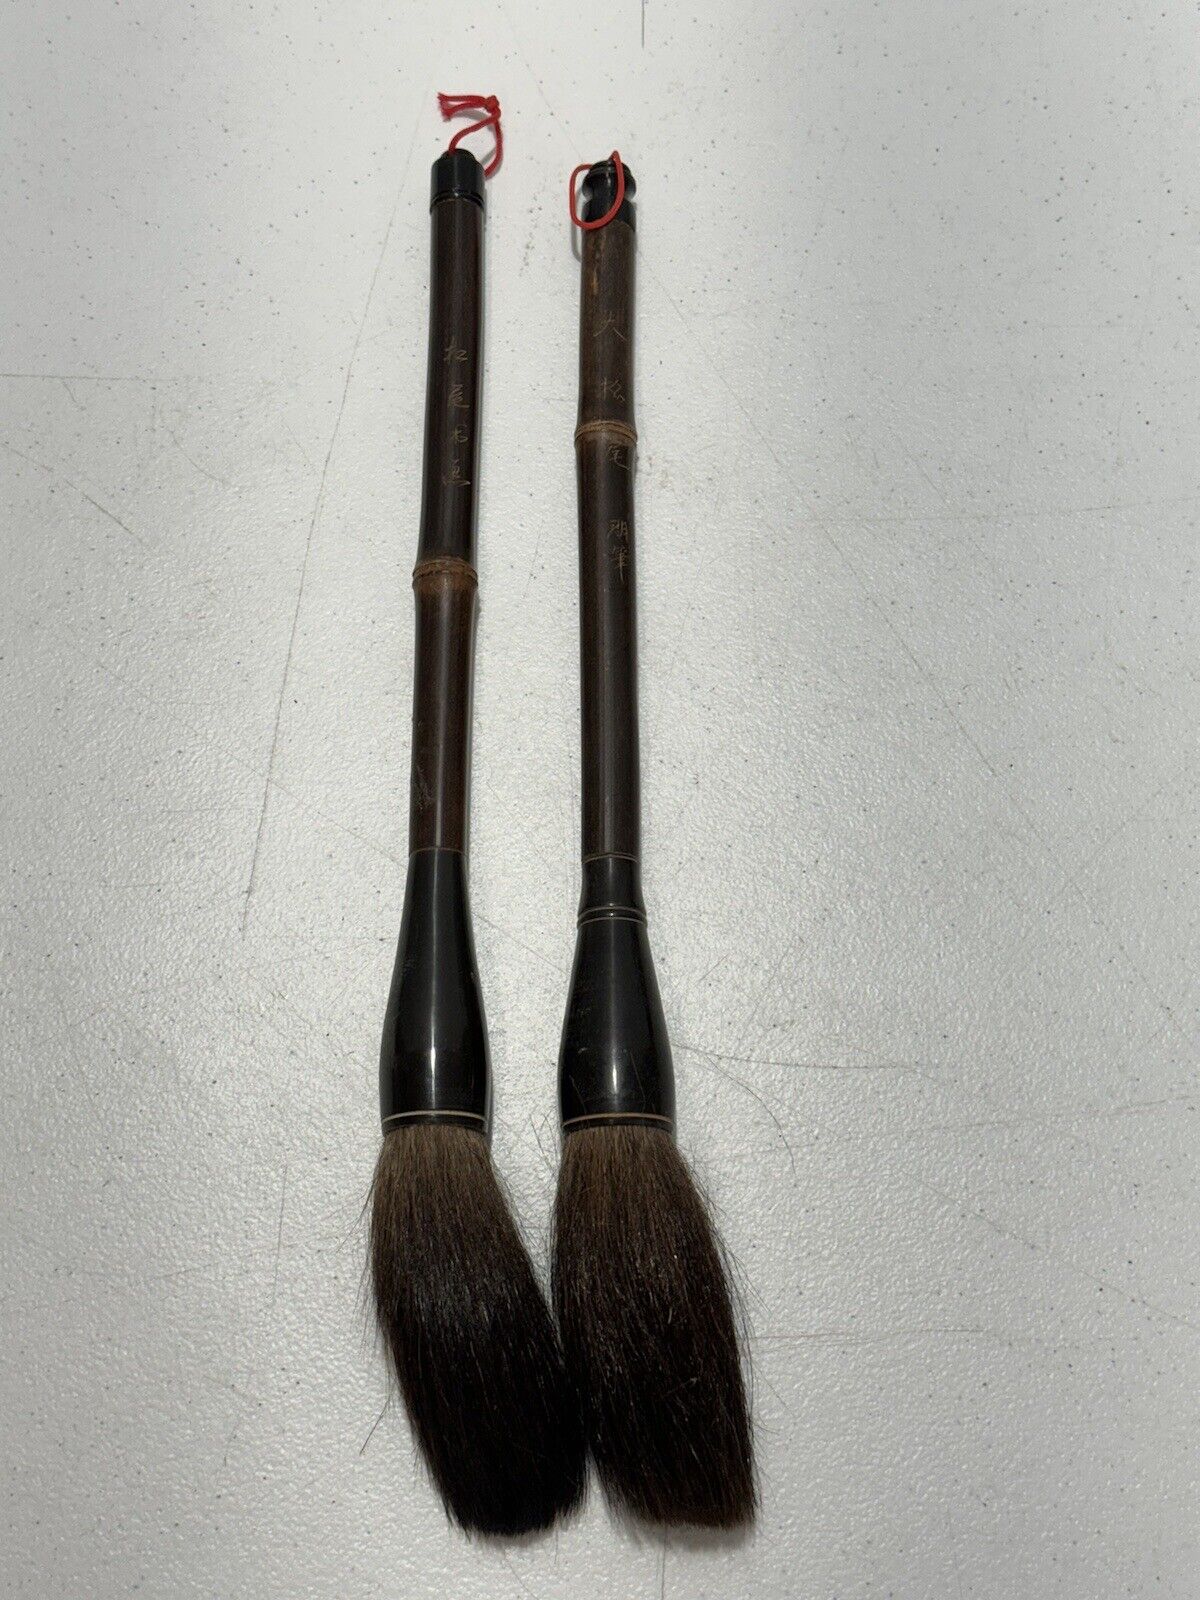 2 Vintage Chinese Horse Hair Calligraphy Brushes